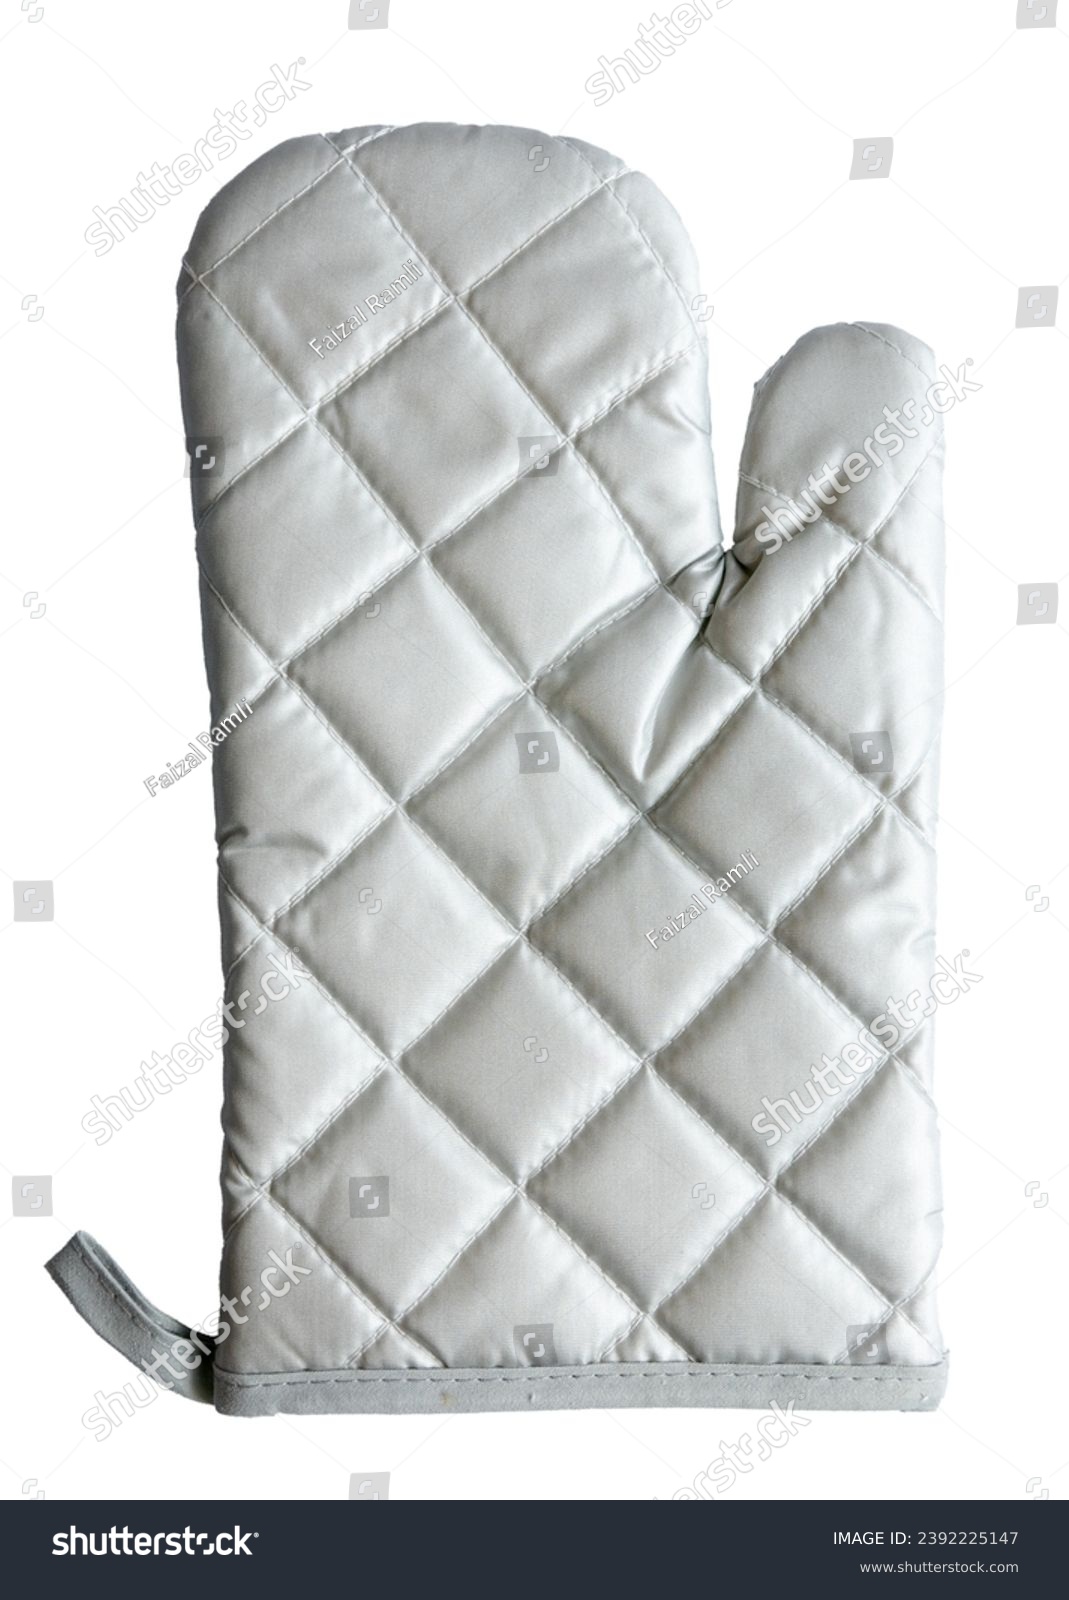 Grey kitchen glove, heat protection and safety isolated on white. #2392225147